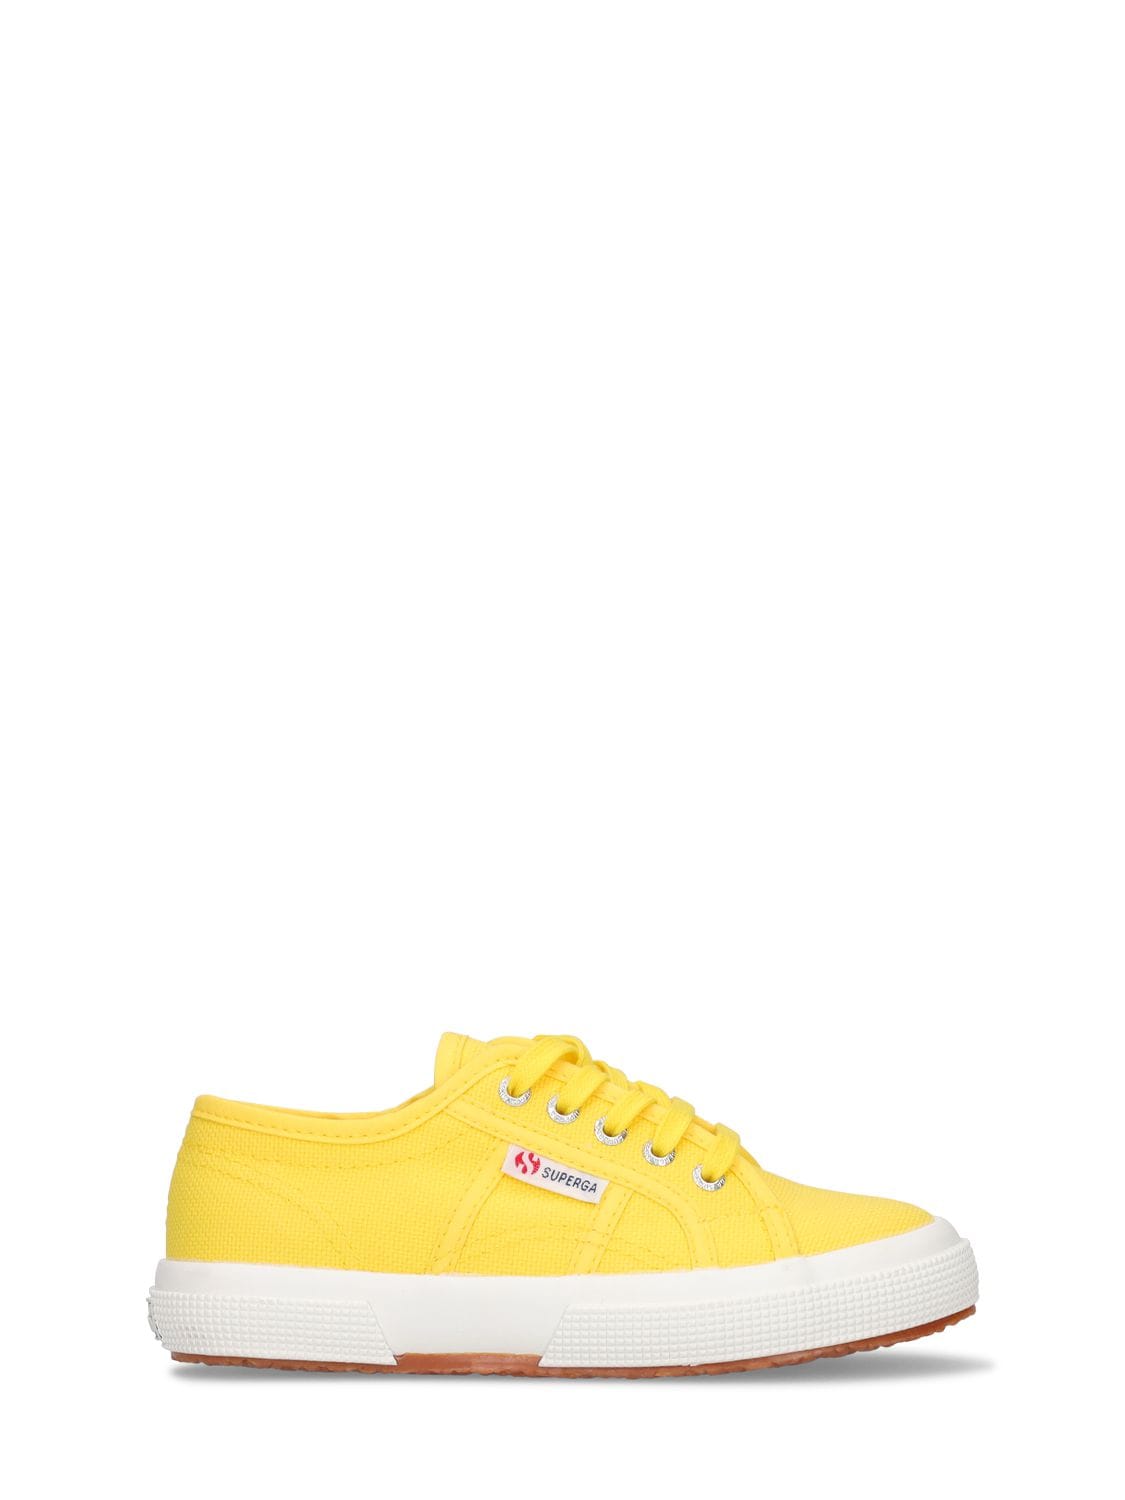 Superga Kids' 2750-jcot Classic Canvas Sneakers In Yellow